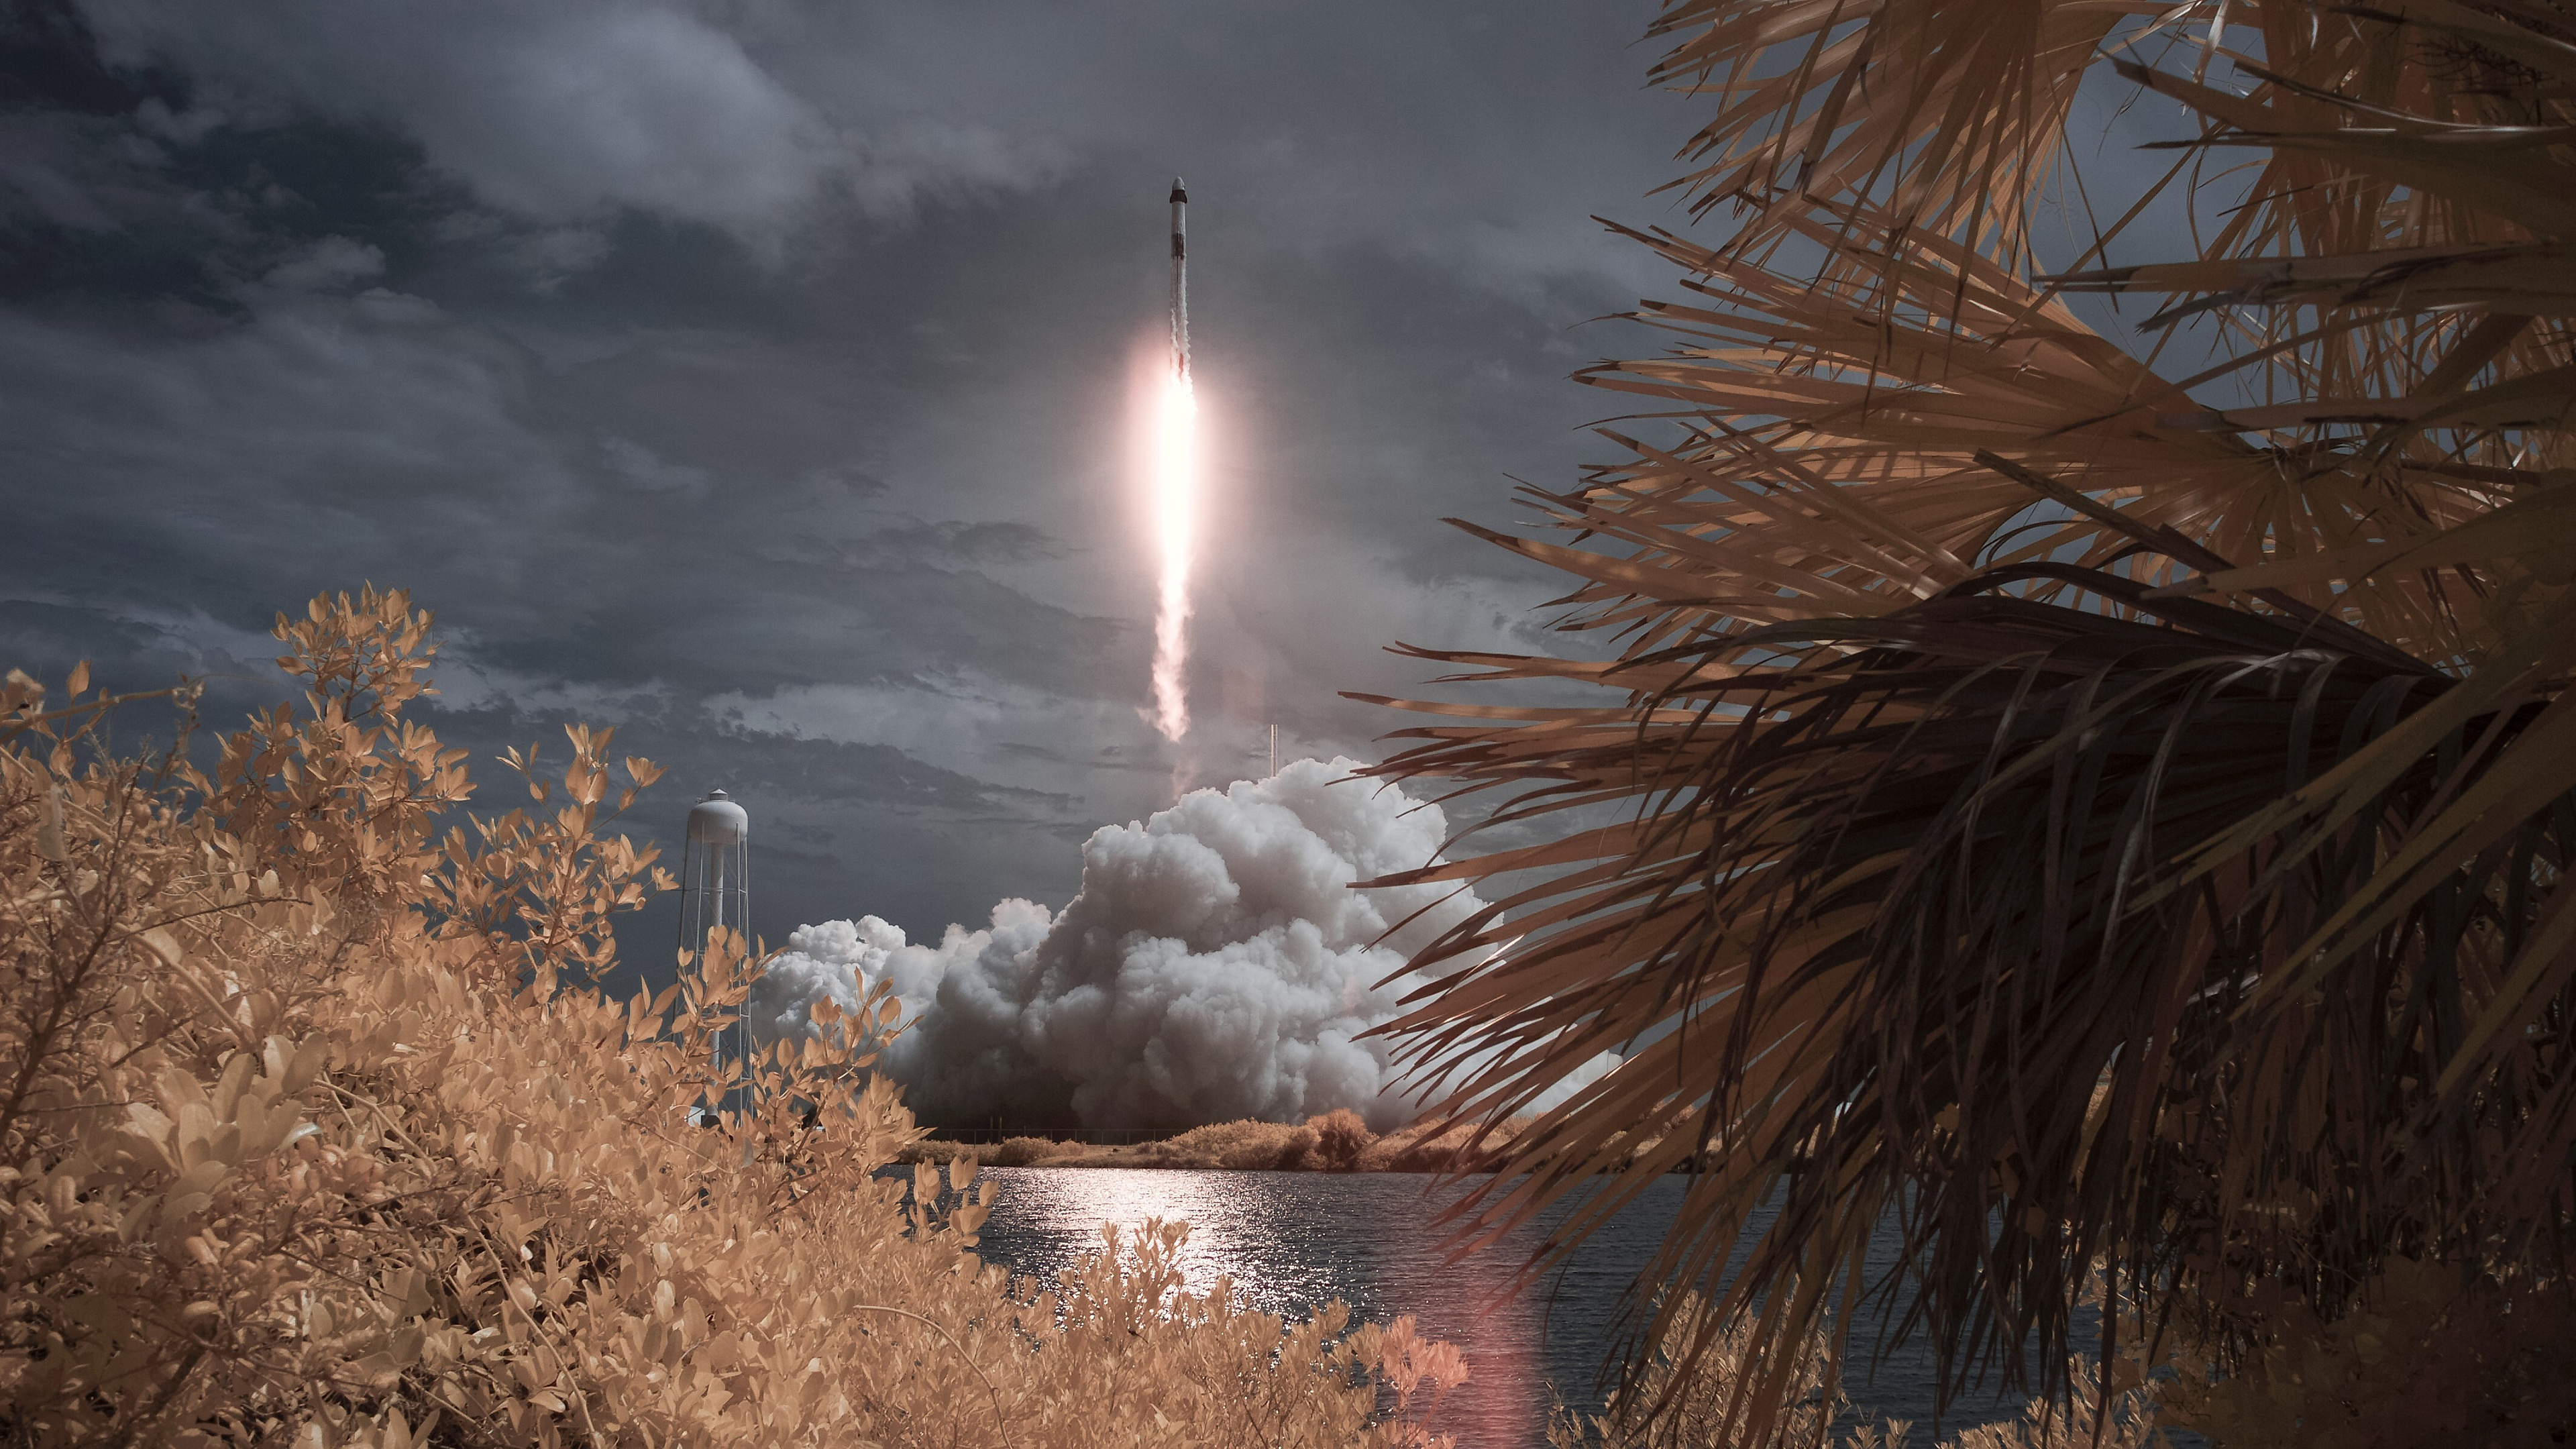 falcon 9, spacex, technology, infrared, rocket High Definition image